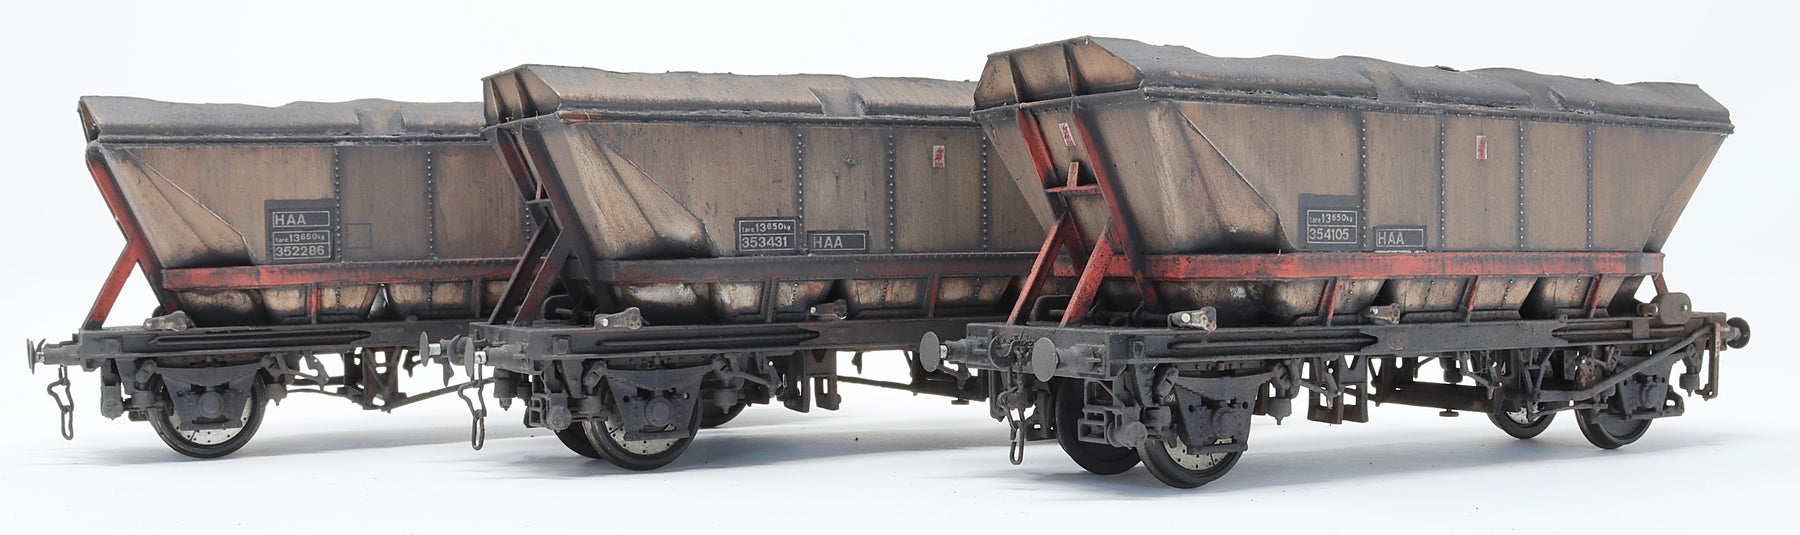 Let's Get Involved - Weathering MGR Wagons With James Makin